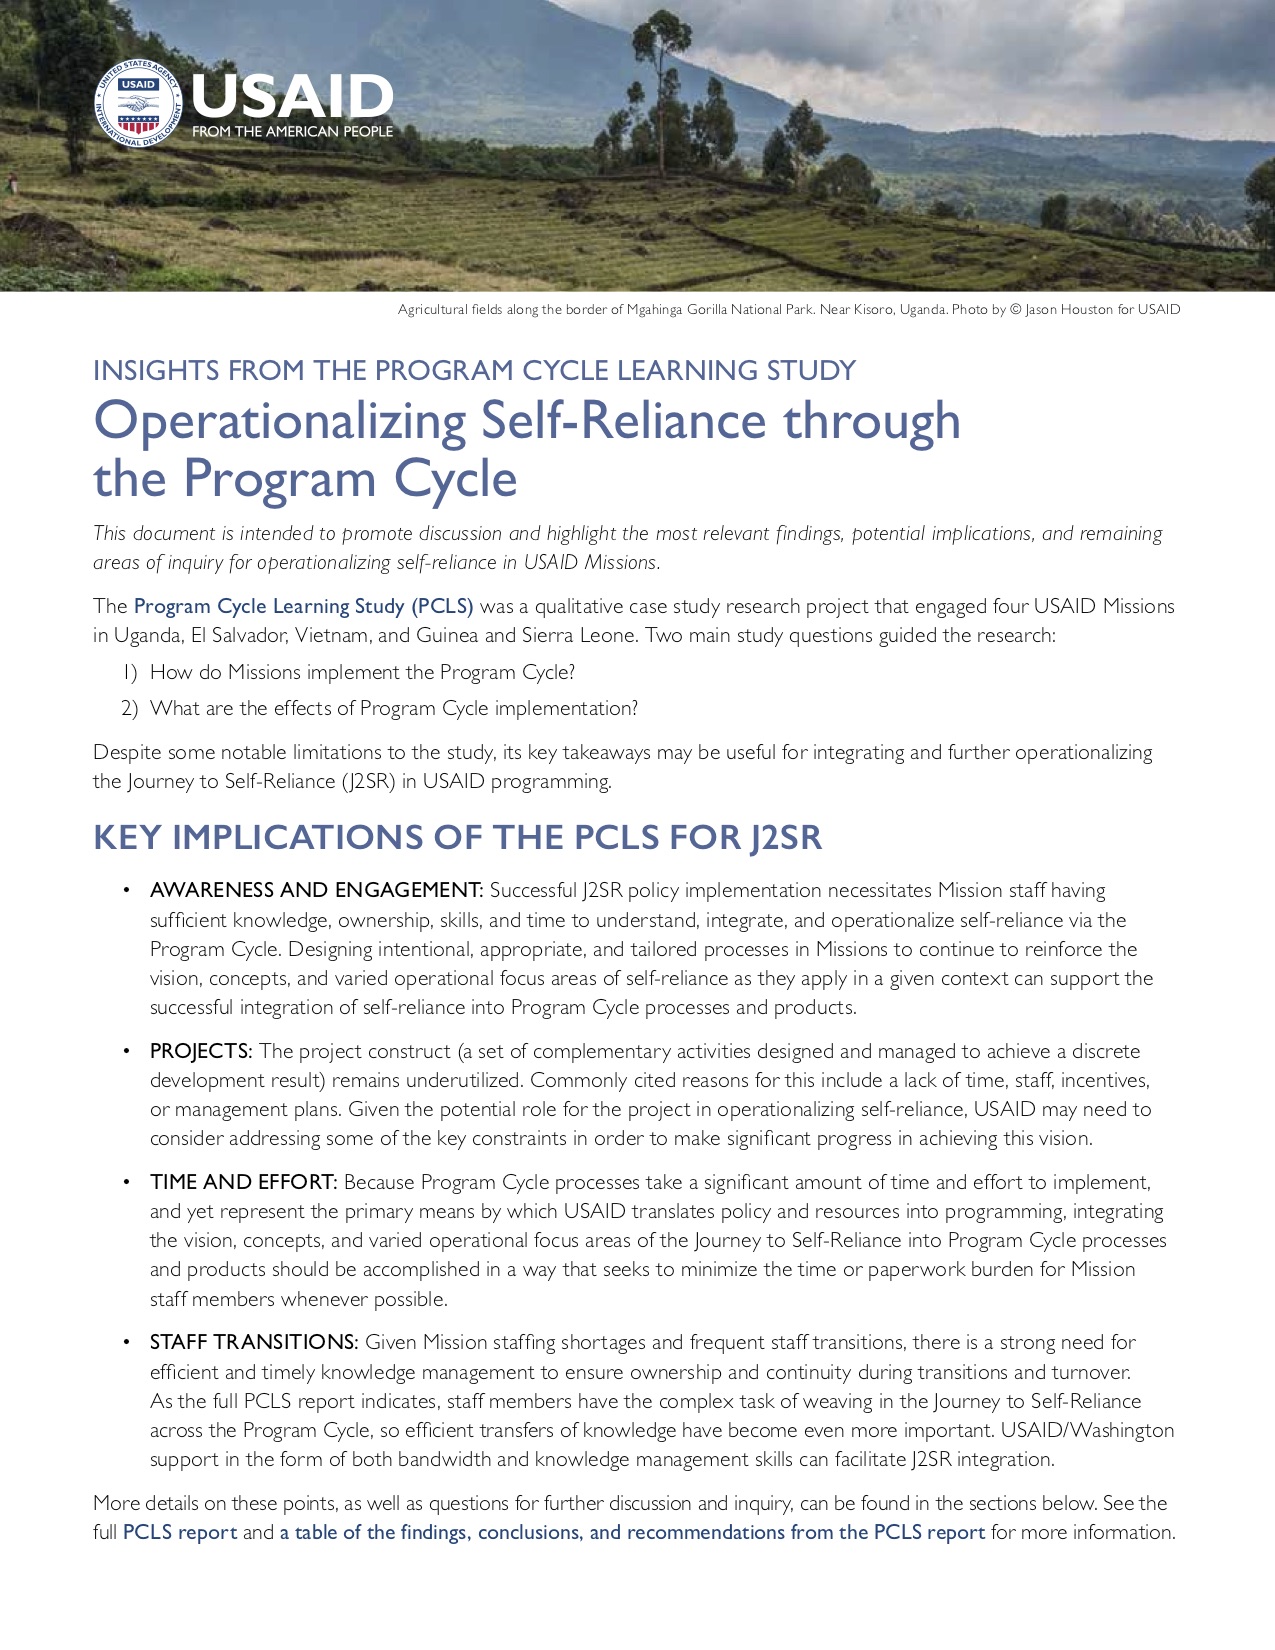 Operationalizing Self-Reliance through the Program Cycle: Insights from the Program Cycle Learning Study